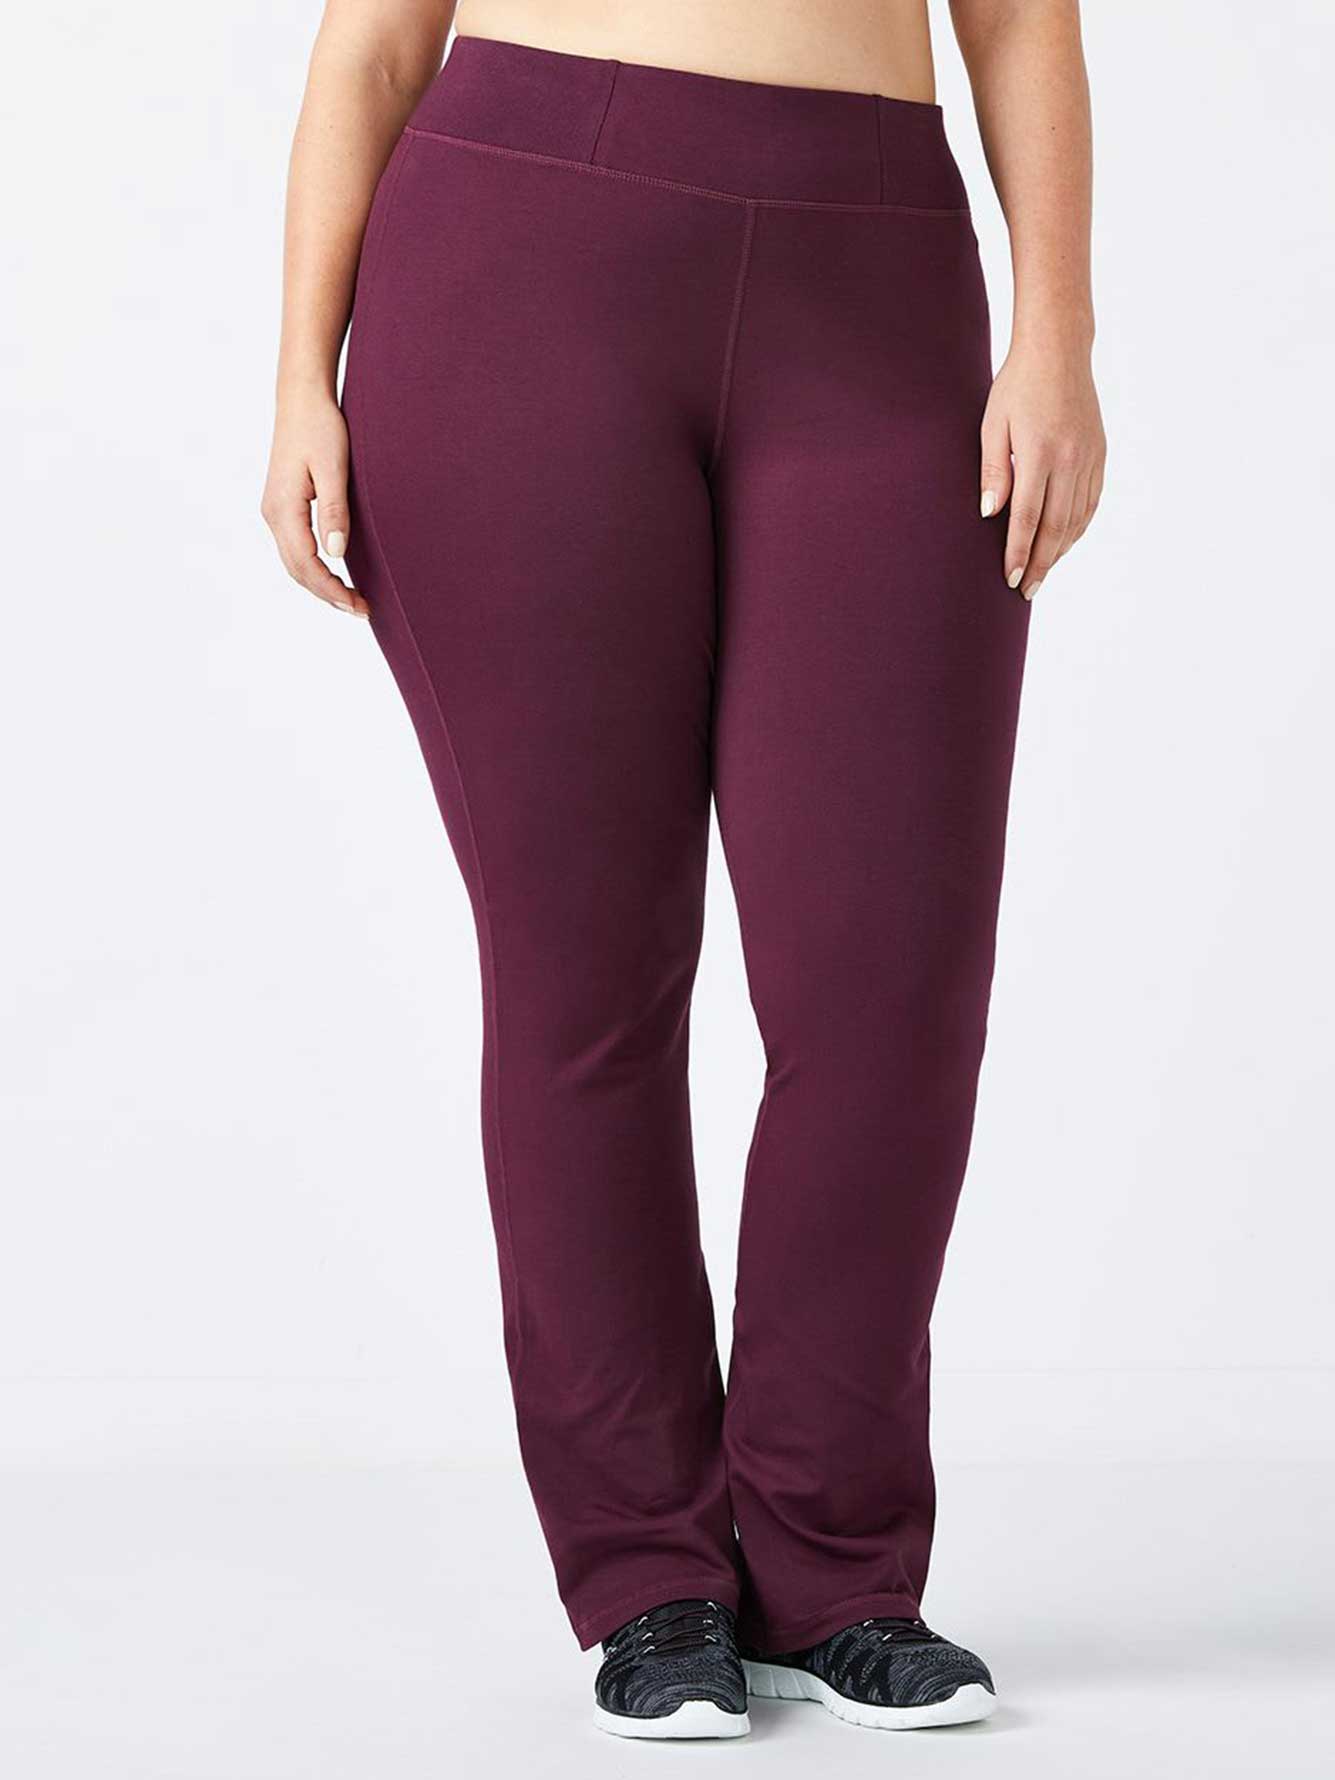 Yoga Pants For Petite Sizes  International Society of Precision Agriculture